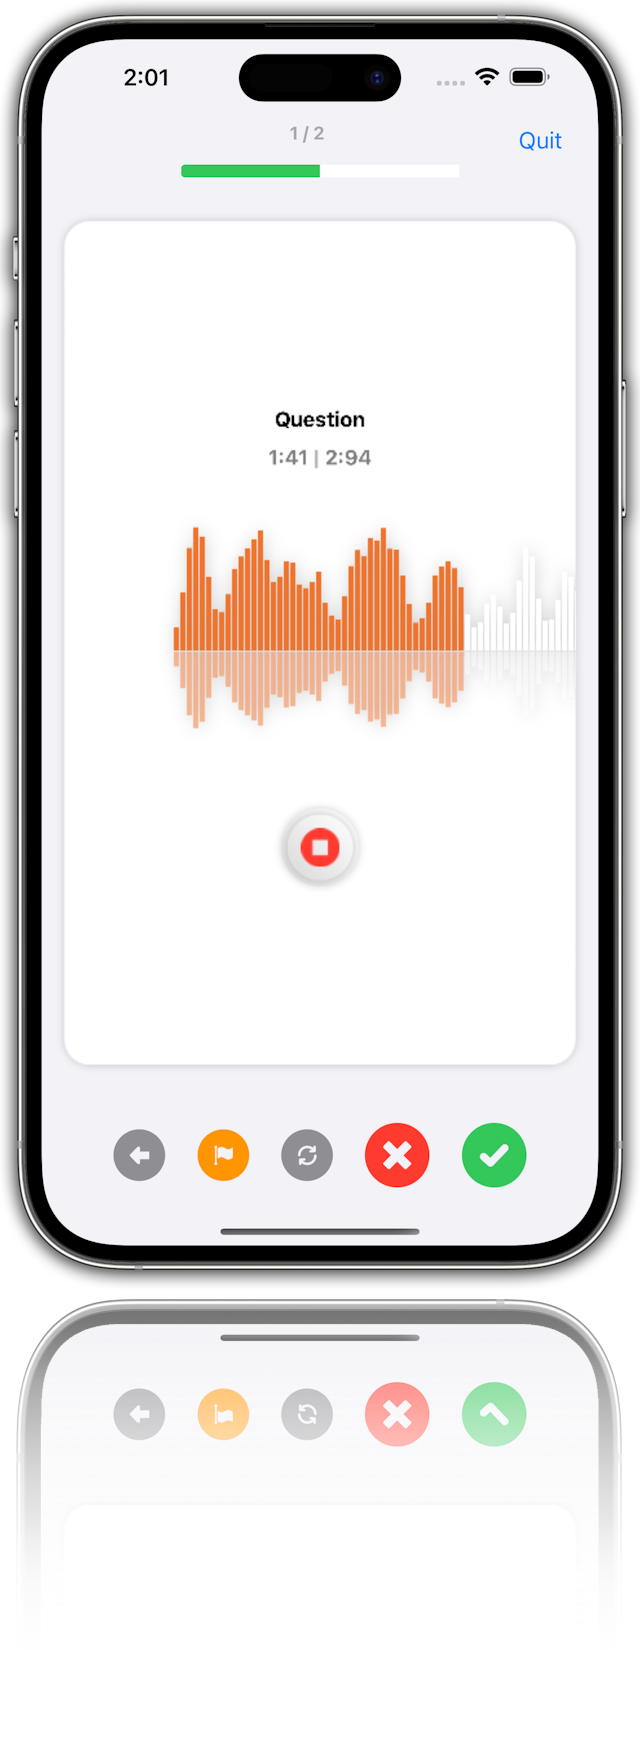 This is a photo of a phone screen with an audio recording app open. The app is white with a green header and a red record button in the center. The app is displaying a waveform of the audio recording. The waveform is orange and gray. The app is in the middle of a recording, as indicated by the red record button and the timer at the top. The phone is an iPhone with a white background.